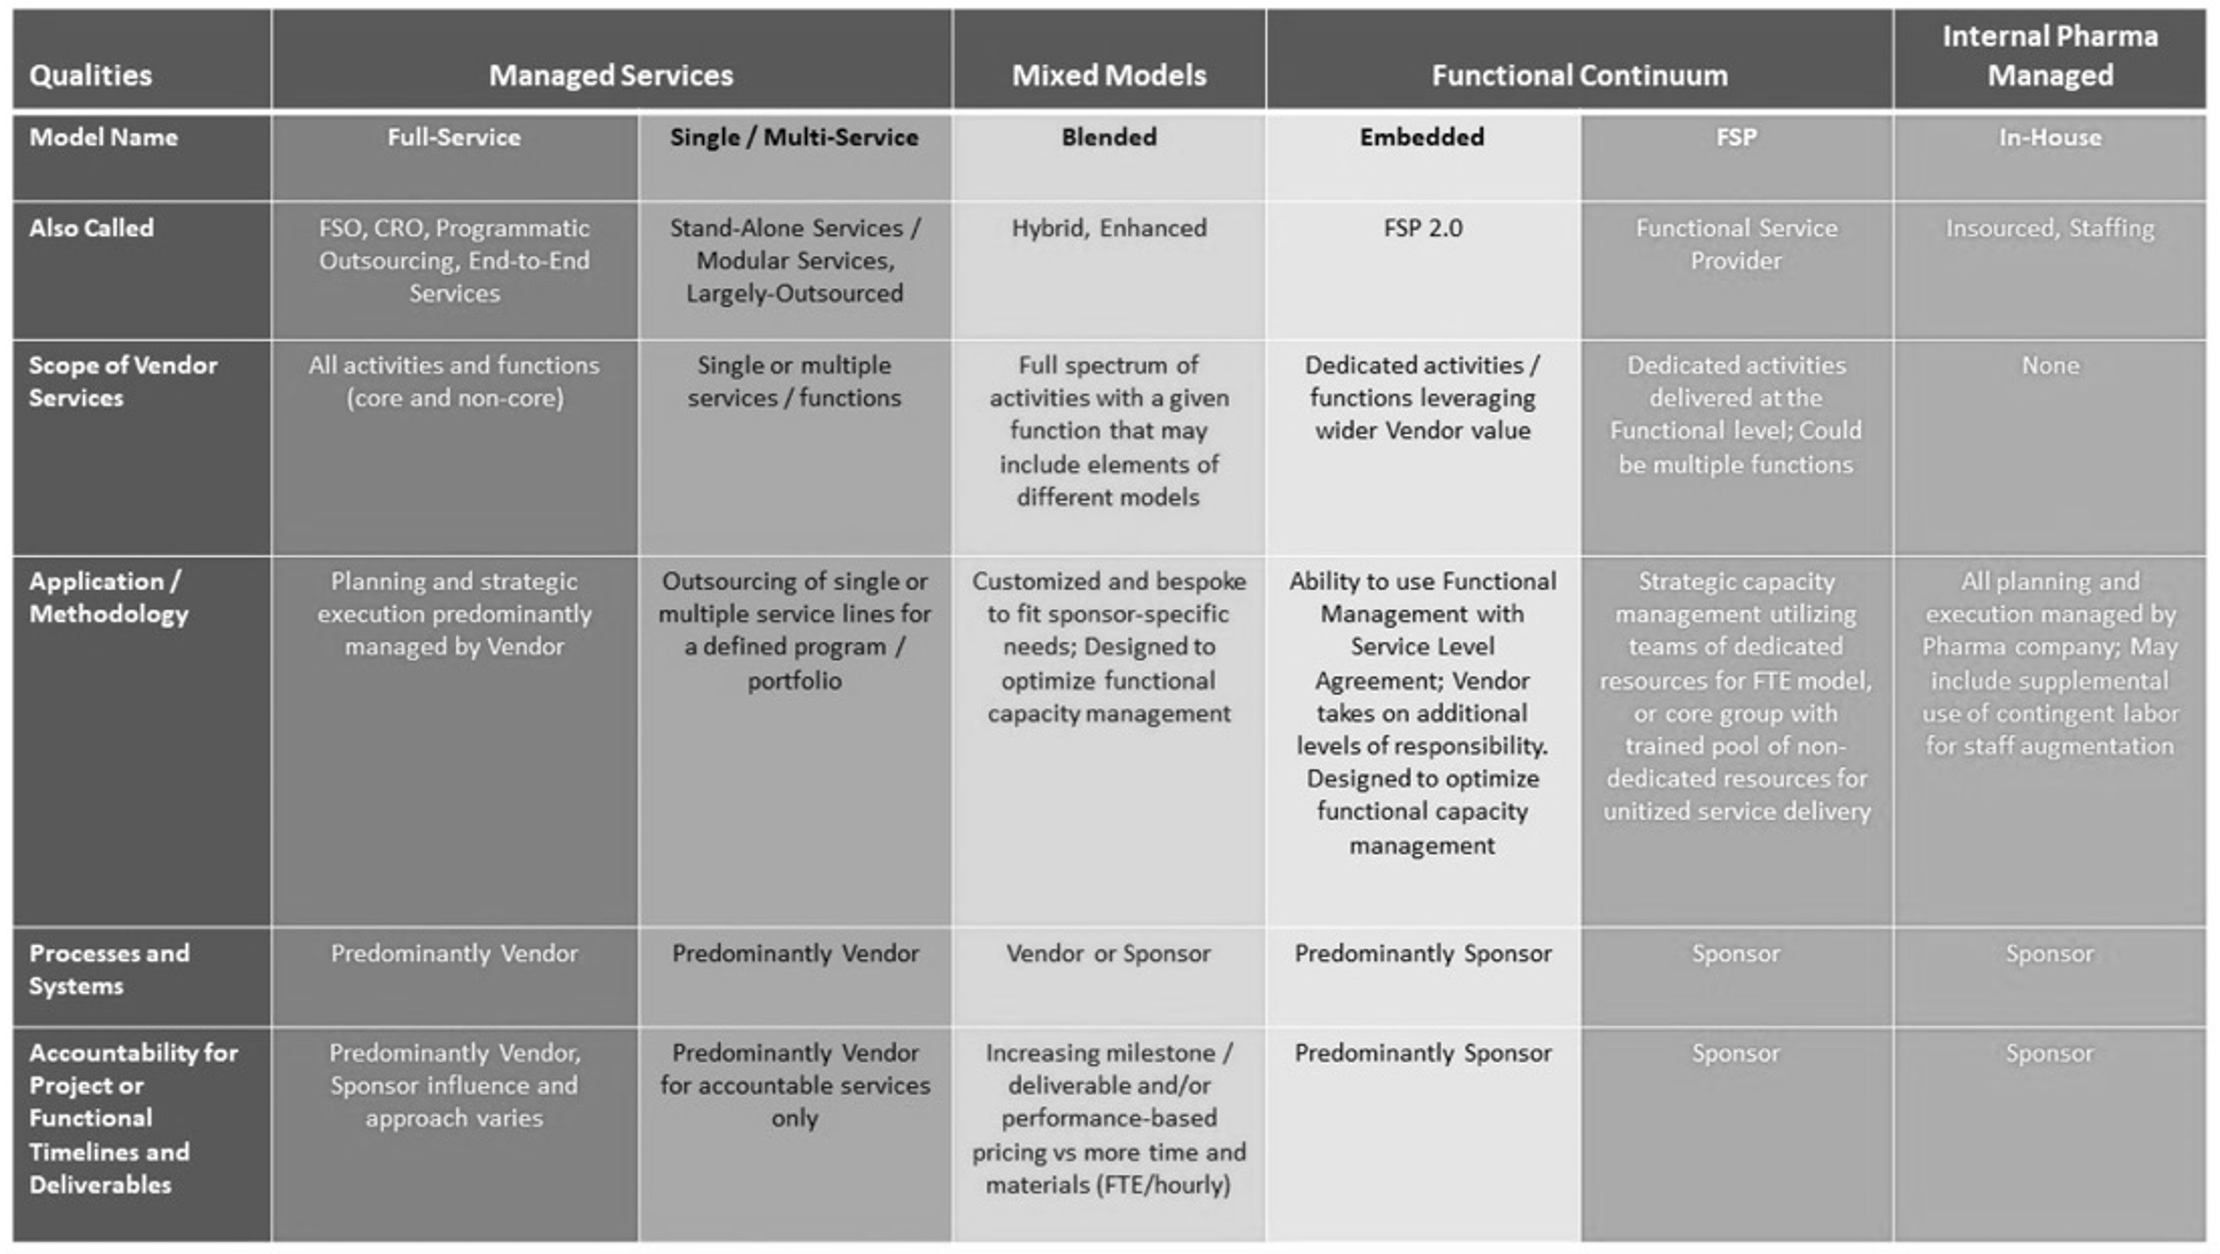 Table 1. New Taxonomy in Clinical Development Sourcing Models

Source: Getz, K.; Shah, S.; Luithle, J.; Travers, M. Redefining CRO Sourcing Model Terminology to Optimize Outsourcing Strategies. Applied Clinical Trials. Published online September 20, 2022. https://www.appliedclinicaltrialsonline.com/view/redefining-cro-sourcing-model-terminology-to-optimize-outsourcing-strategies.